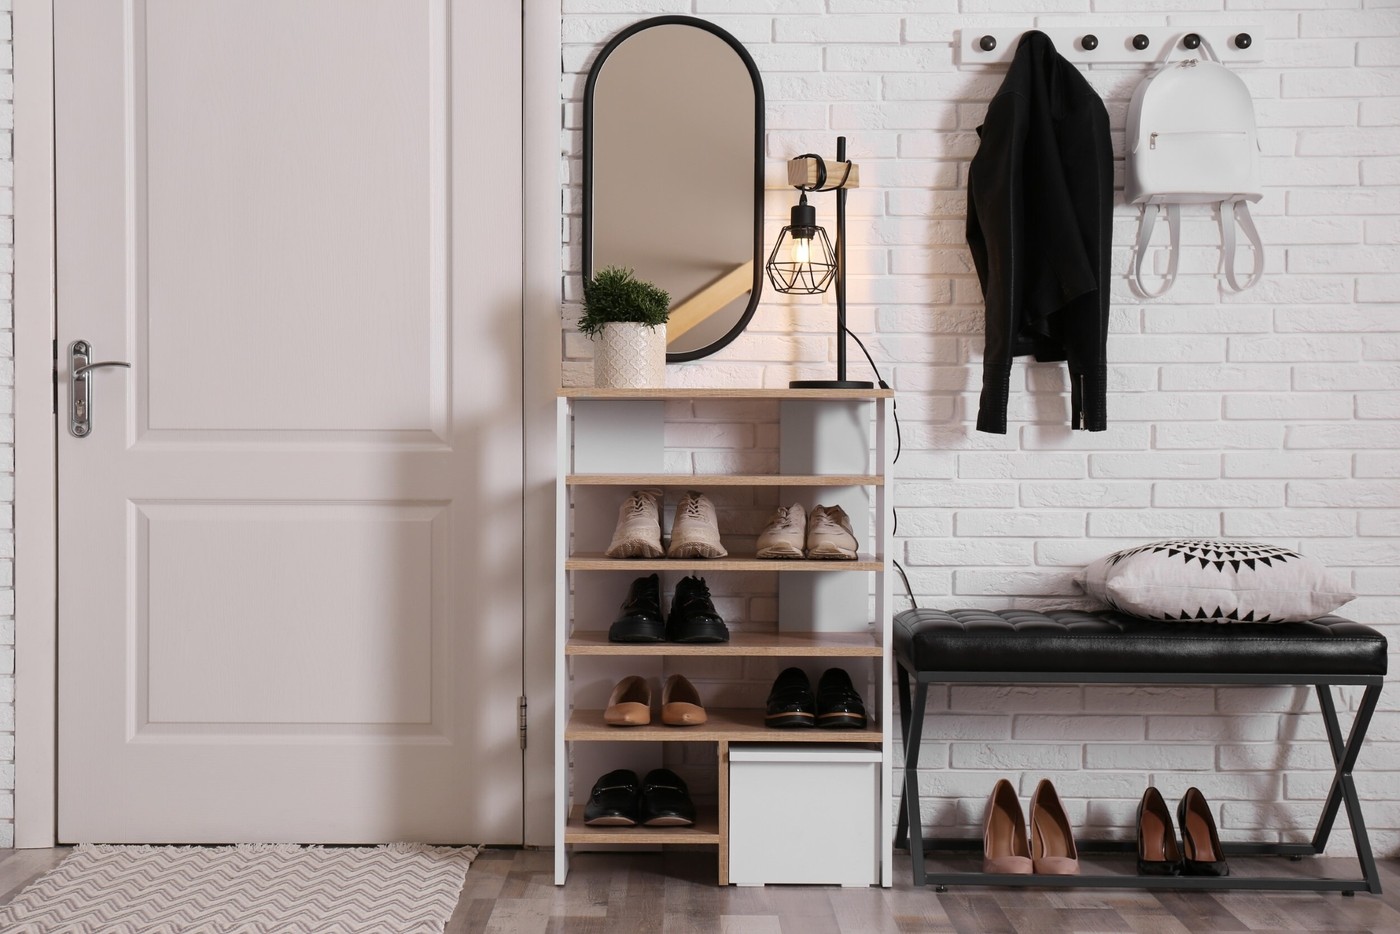  10 Amazing Shoe Storage Solutions for Your Entryway